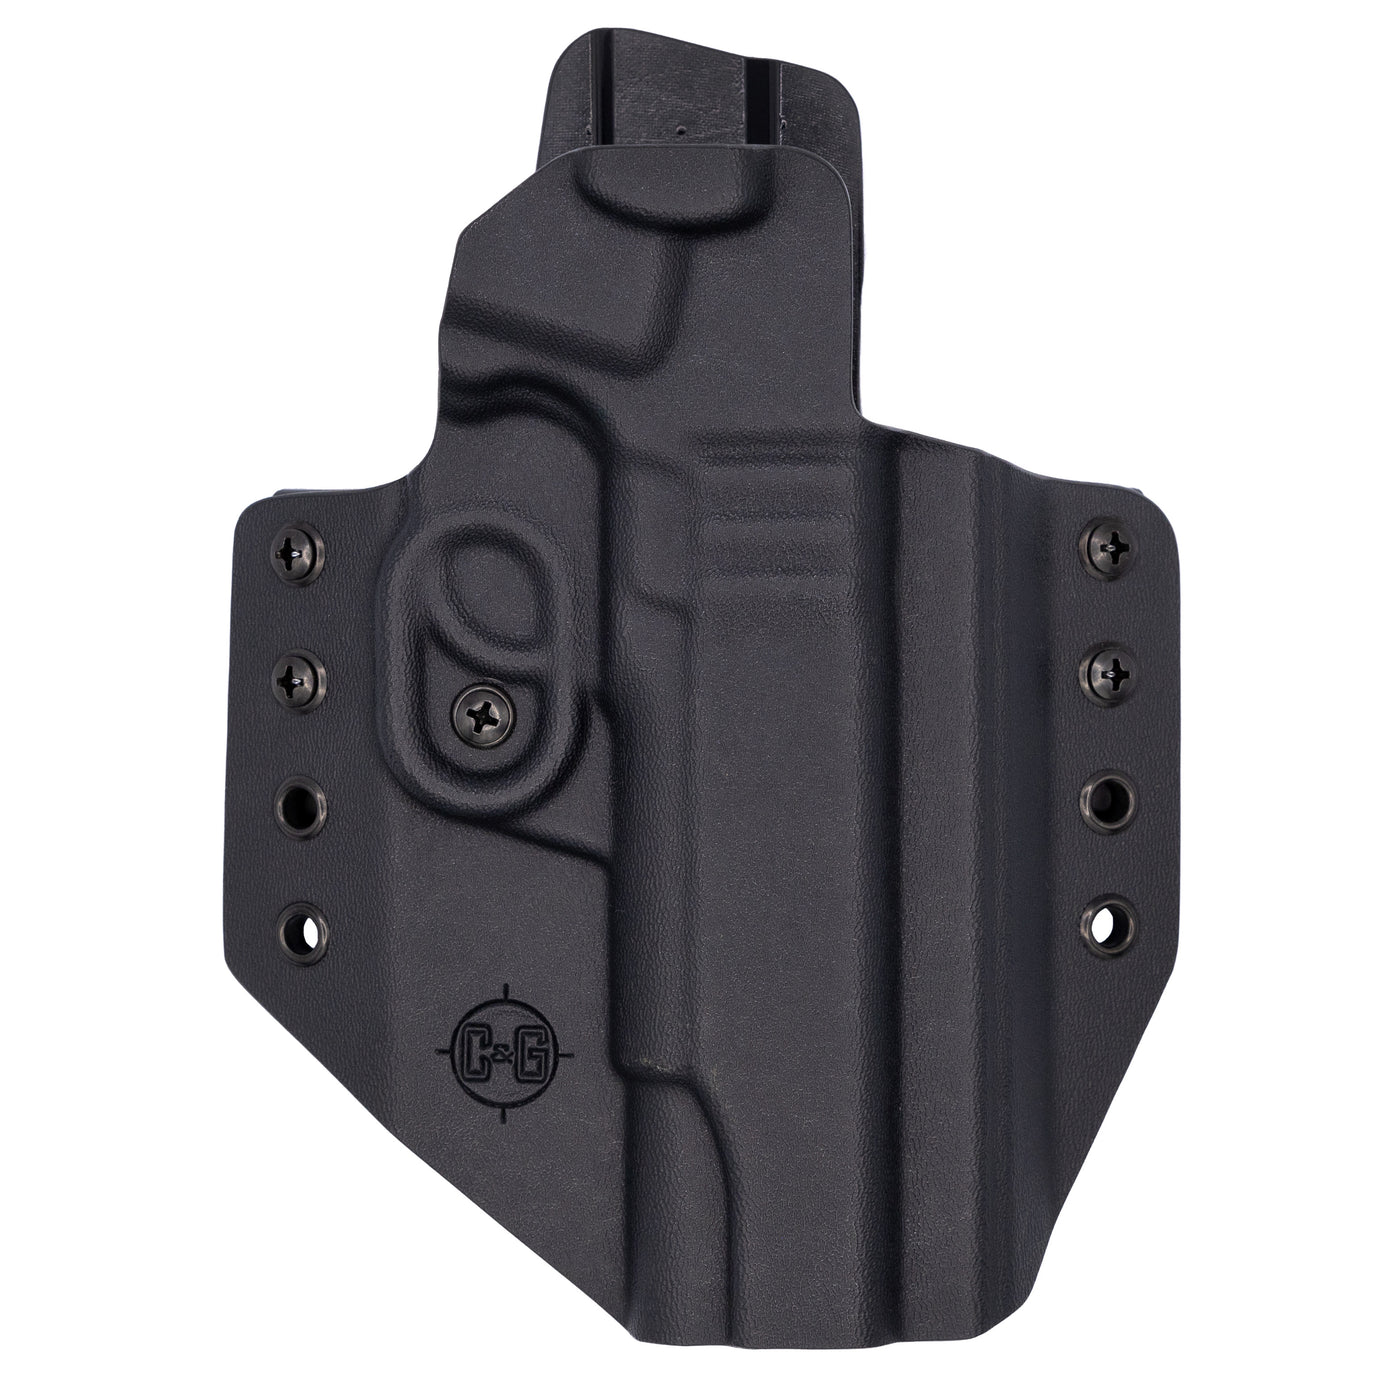 This is the C&G Holsters quickship Covert outside the waistband Kydex holster for 1911 in black